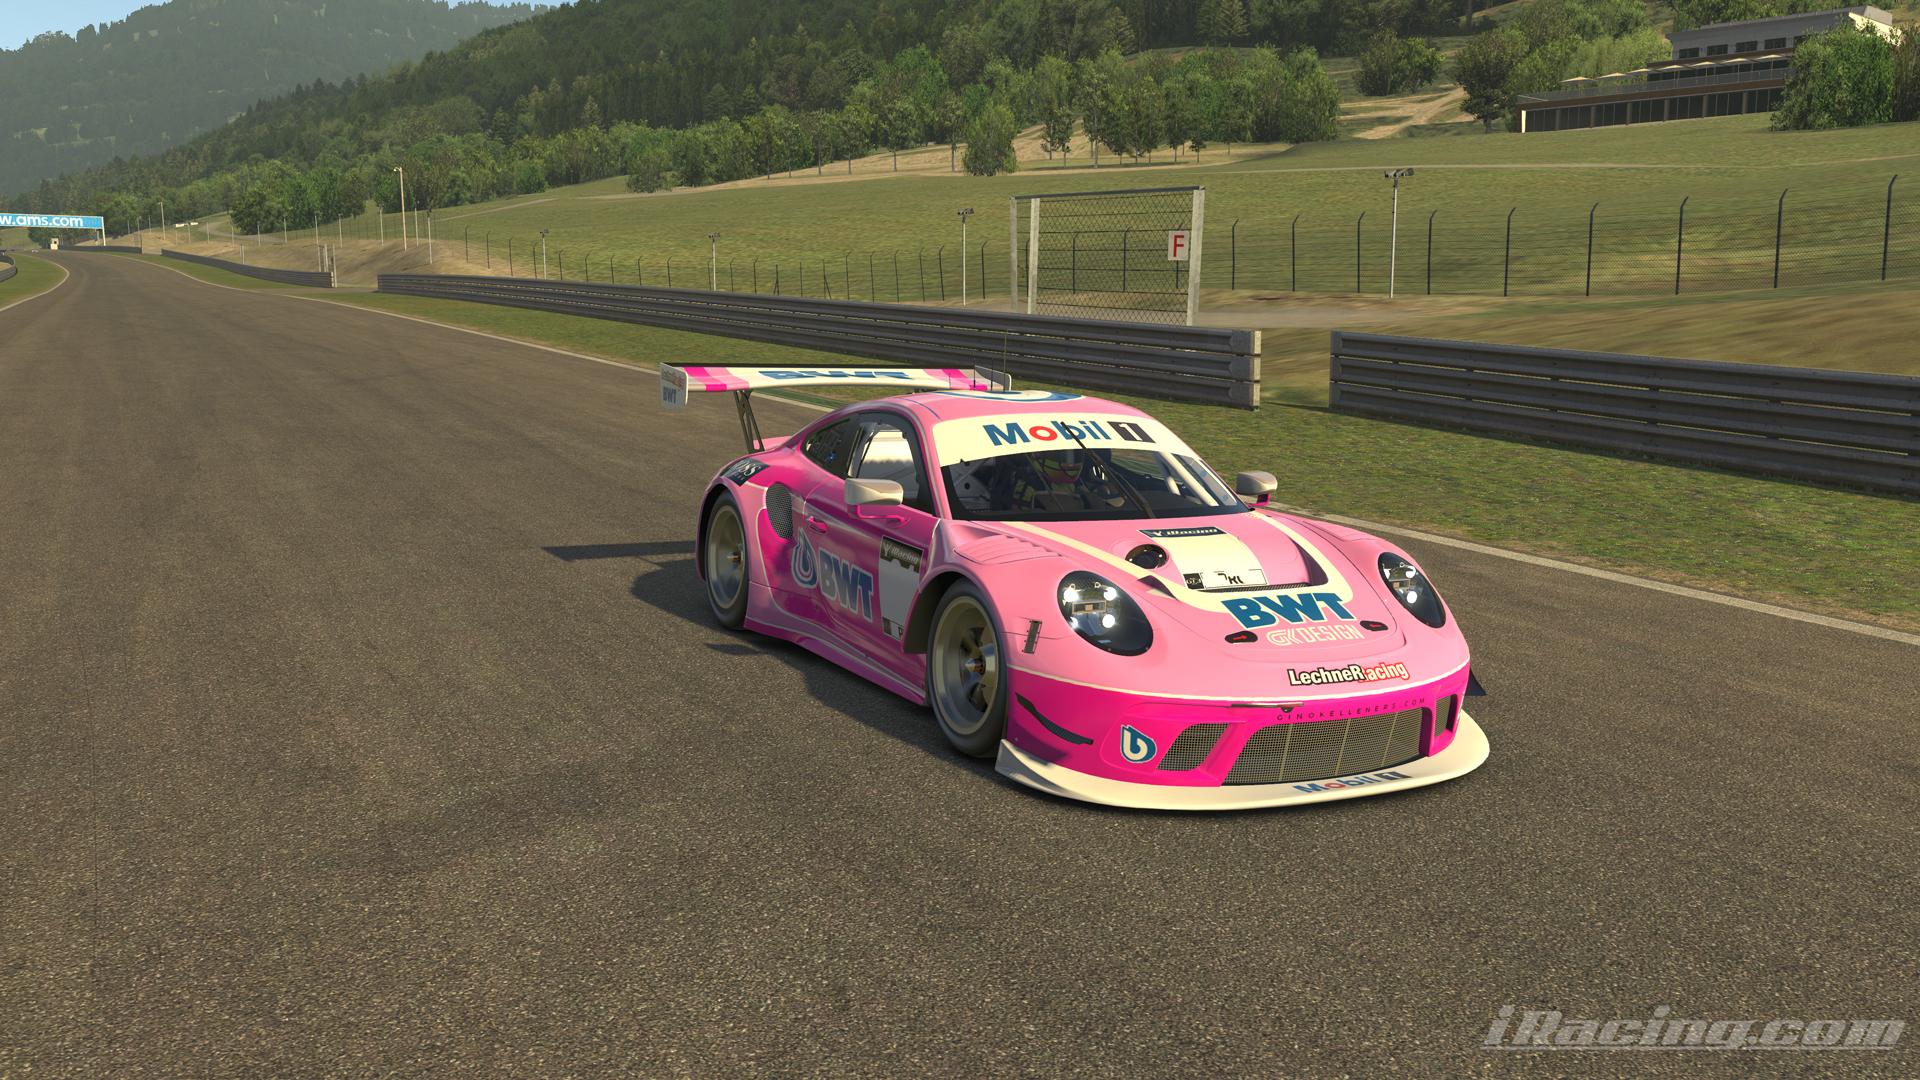 Preview of Lechner Racing BWT Livery - Porsche 911 GT3 R  by Gino Kelleners